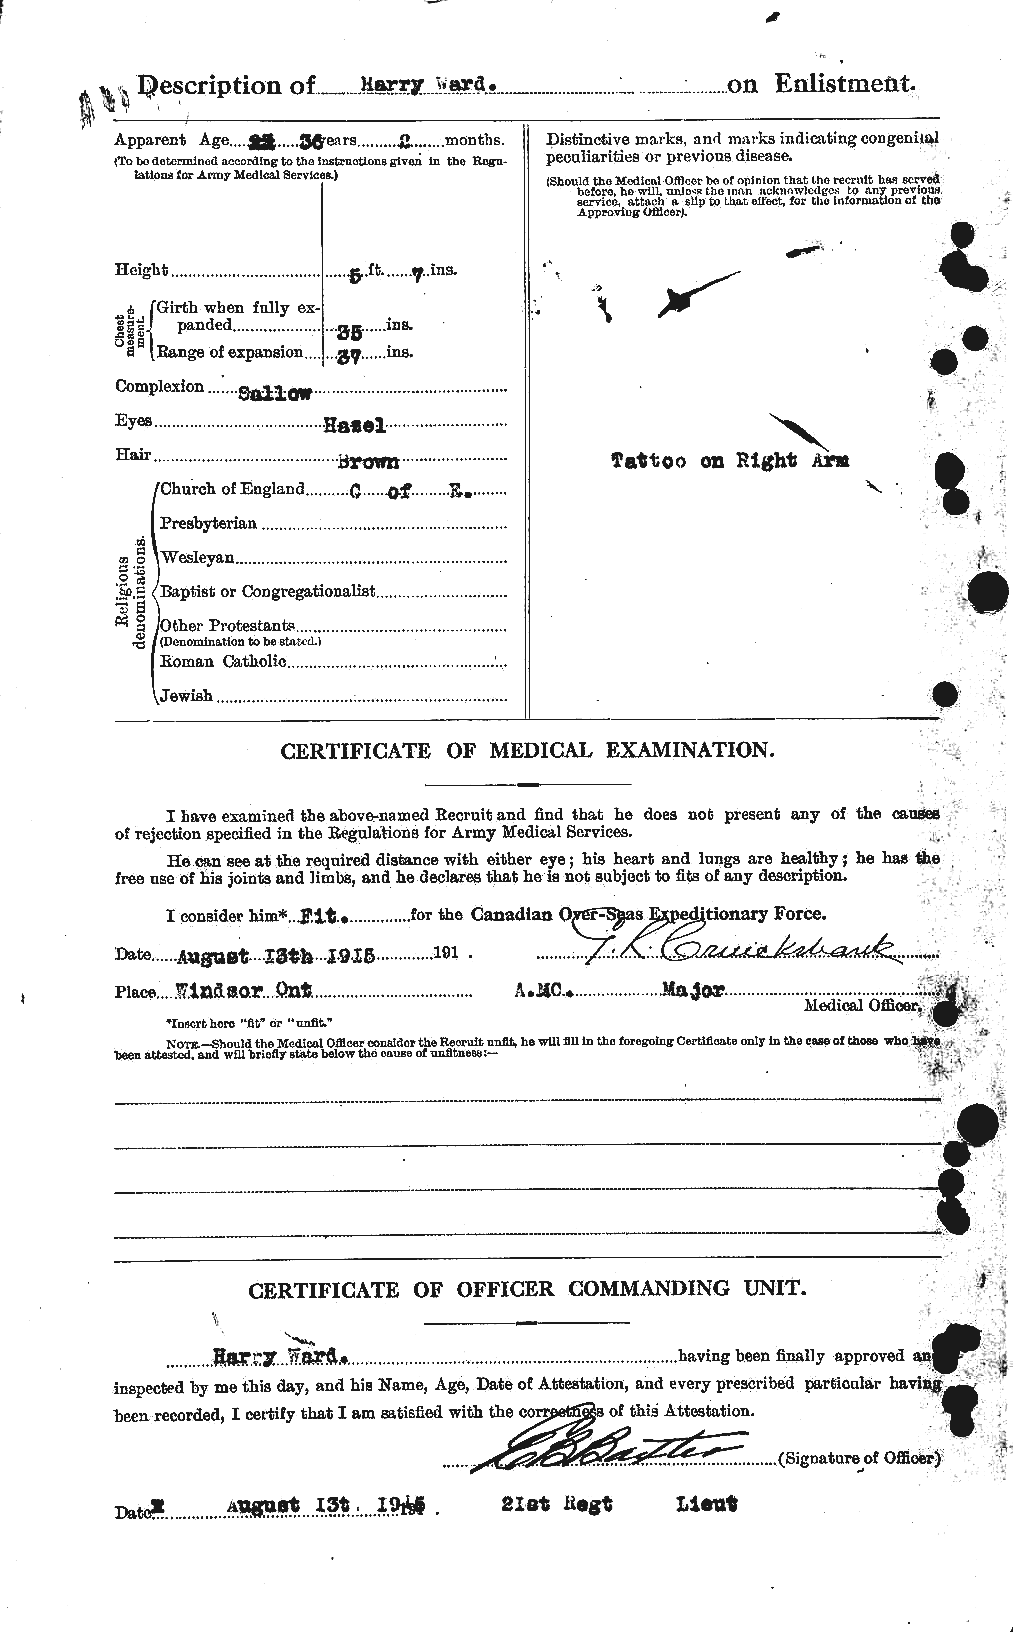 Personnel Records of the First World War - CEF 657810b